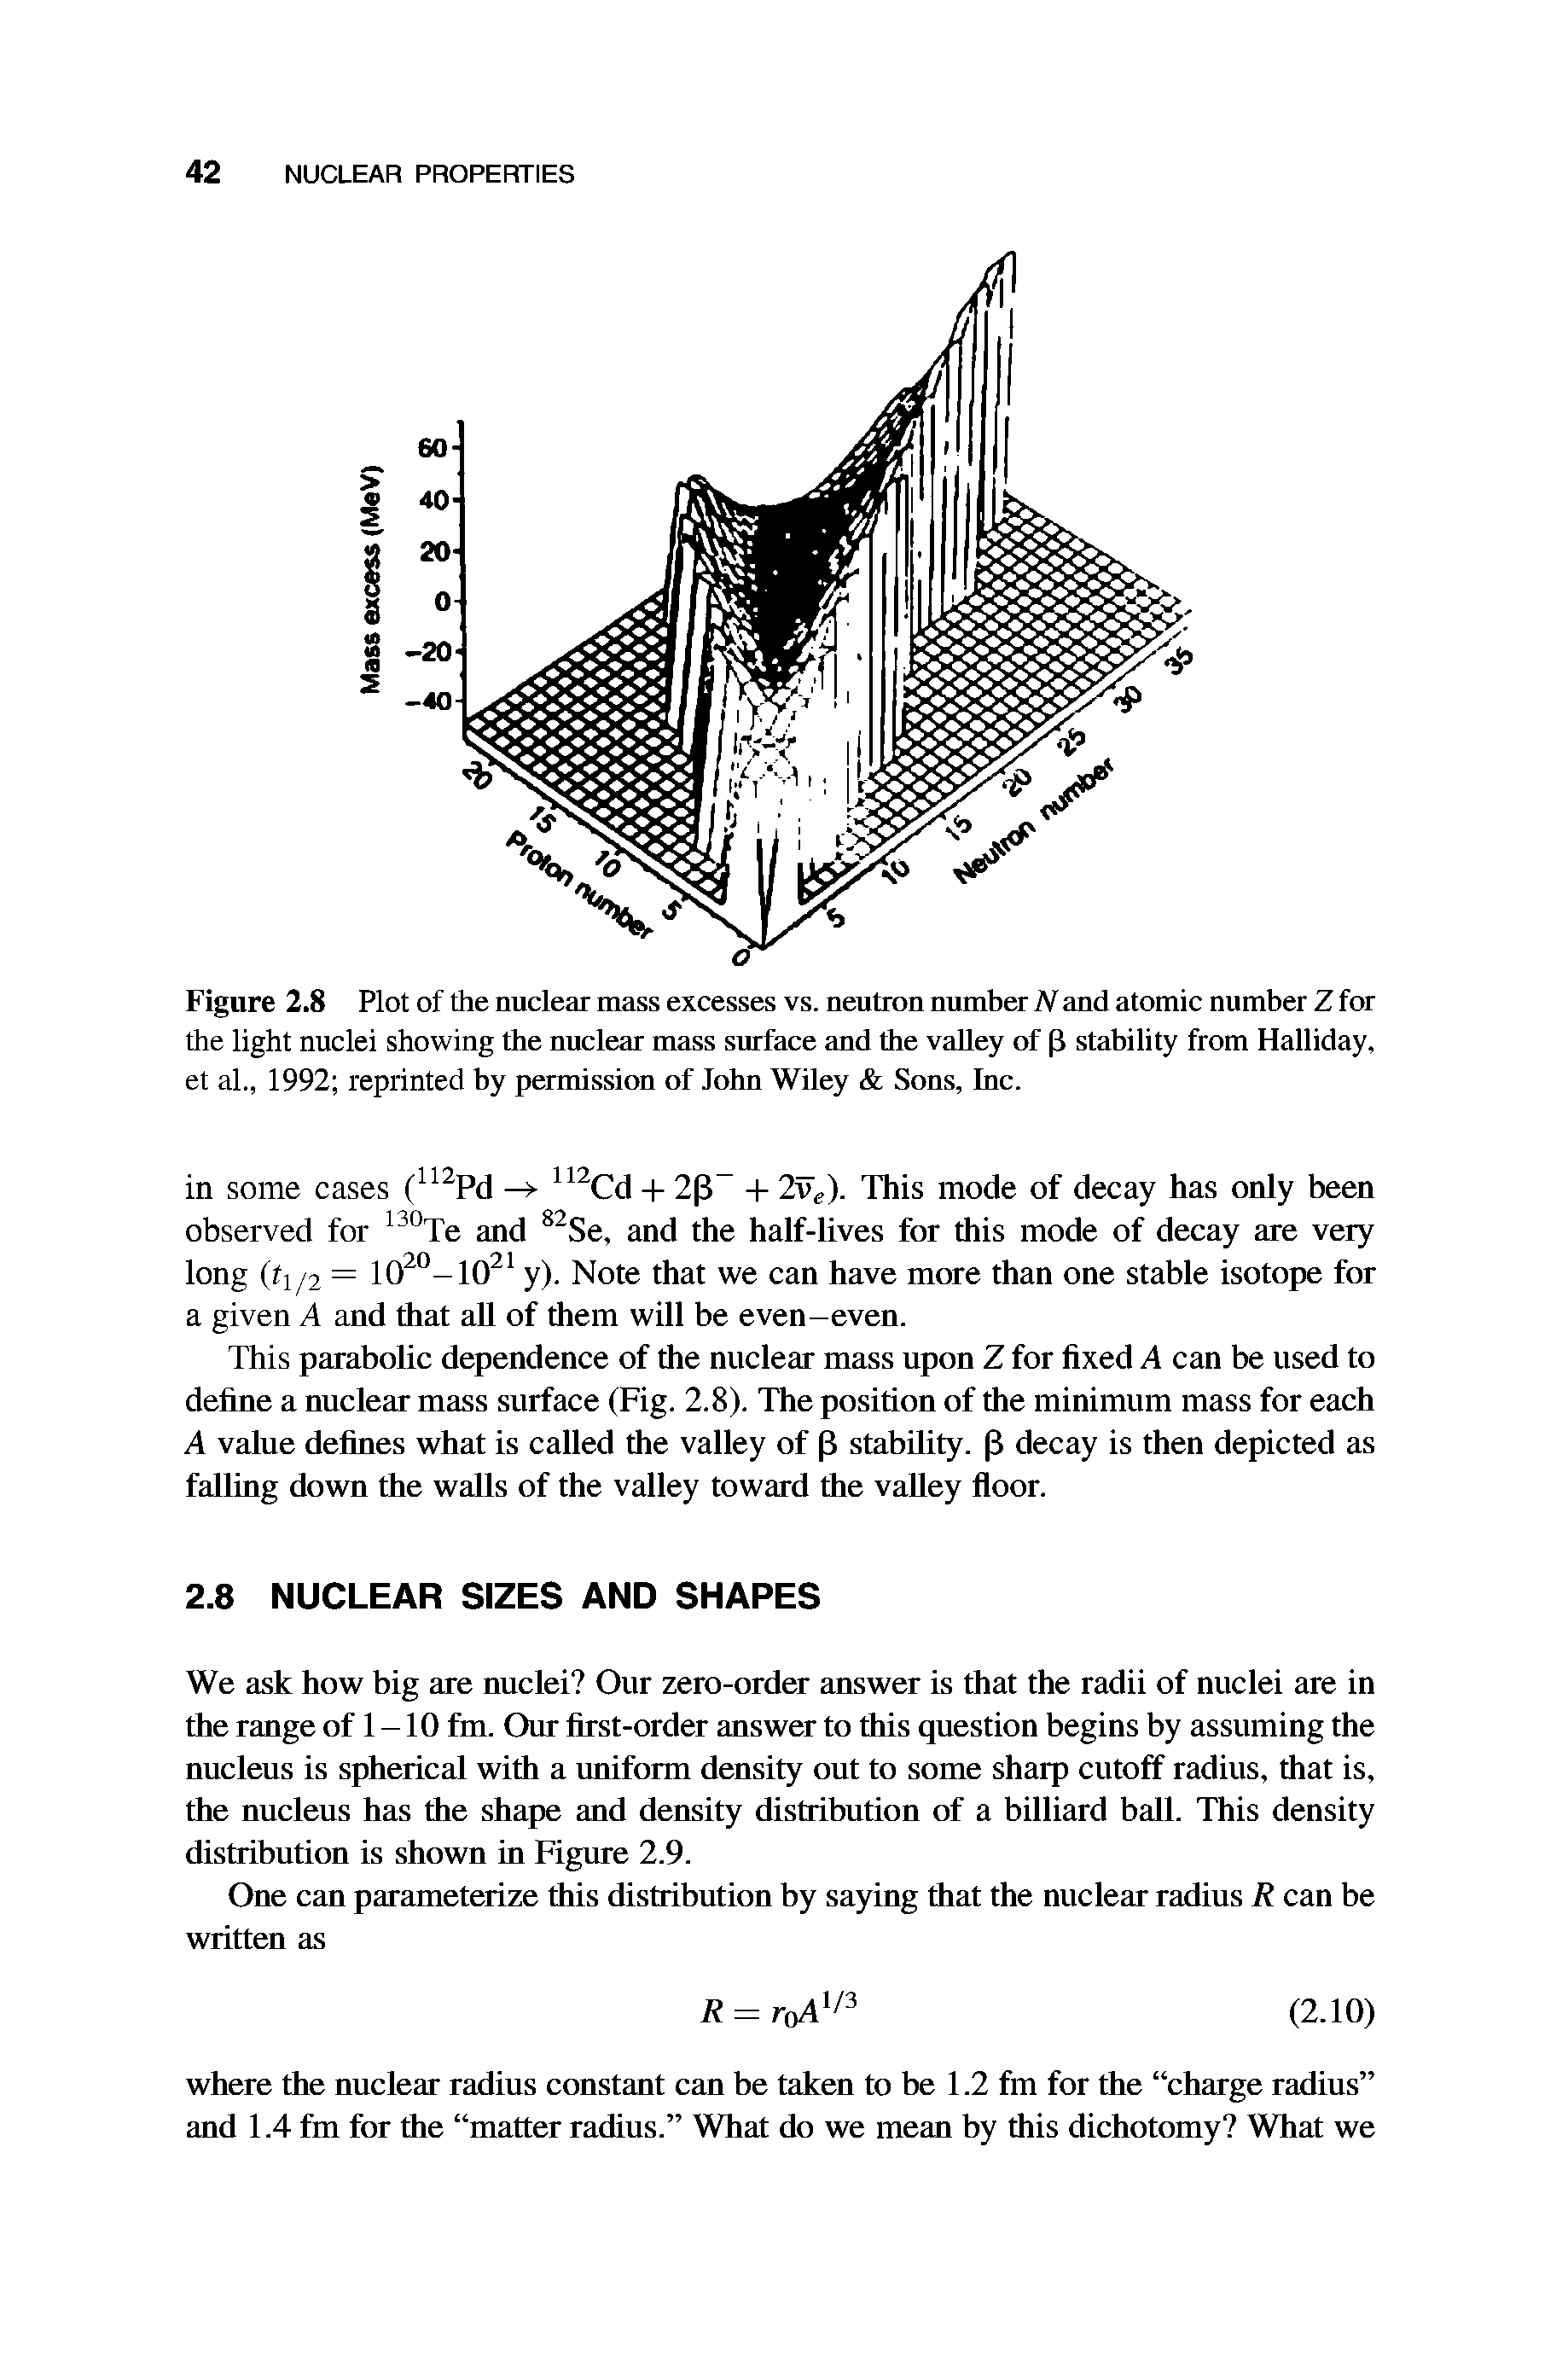 Figure 2.8 Plot of the nuclear mass excesses vs. neutron number N and atomic number Z for the light nuclei showing the nuclear mass surface and the valley of [3 stability from Halliday, et al., 1992 reprinted by permission of John Wiley Sons, Inc.